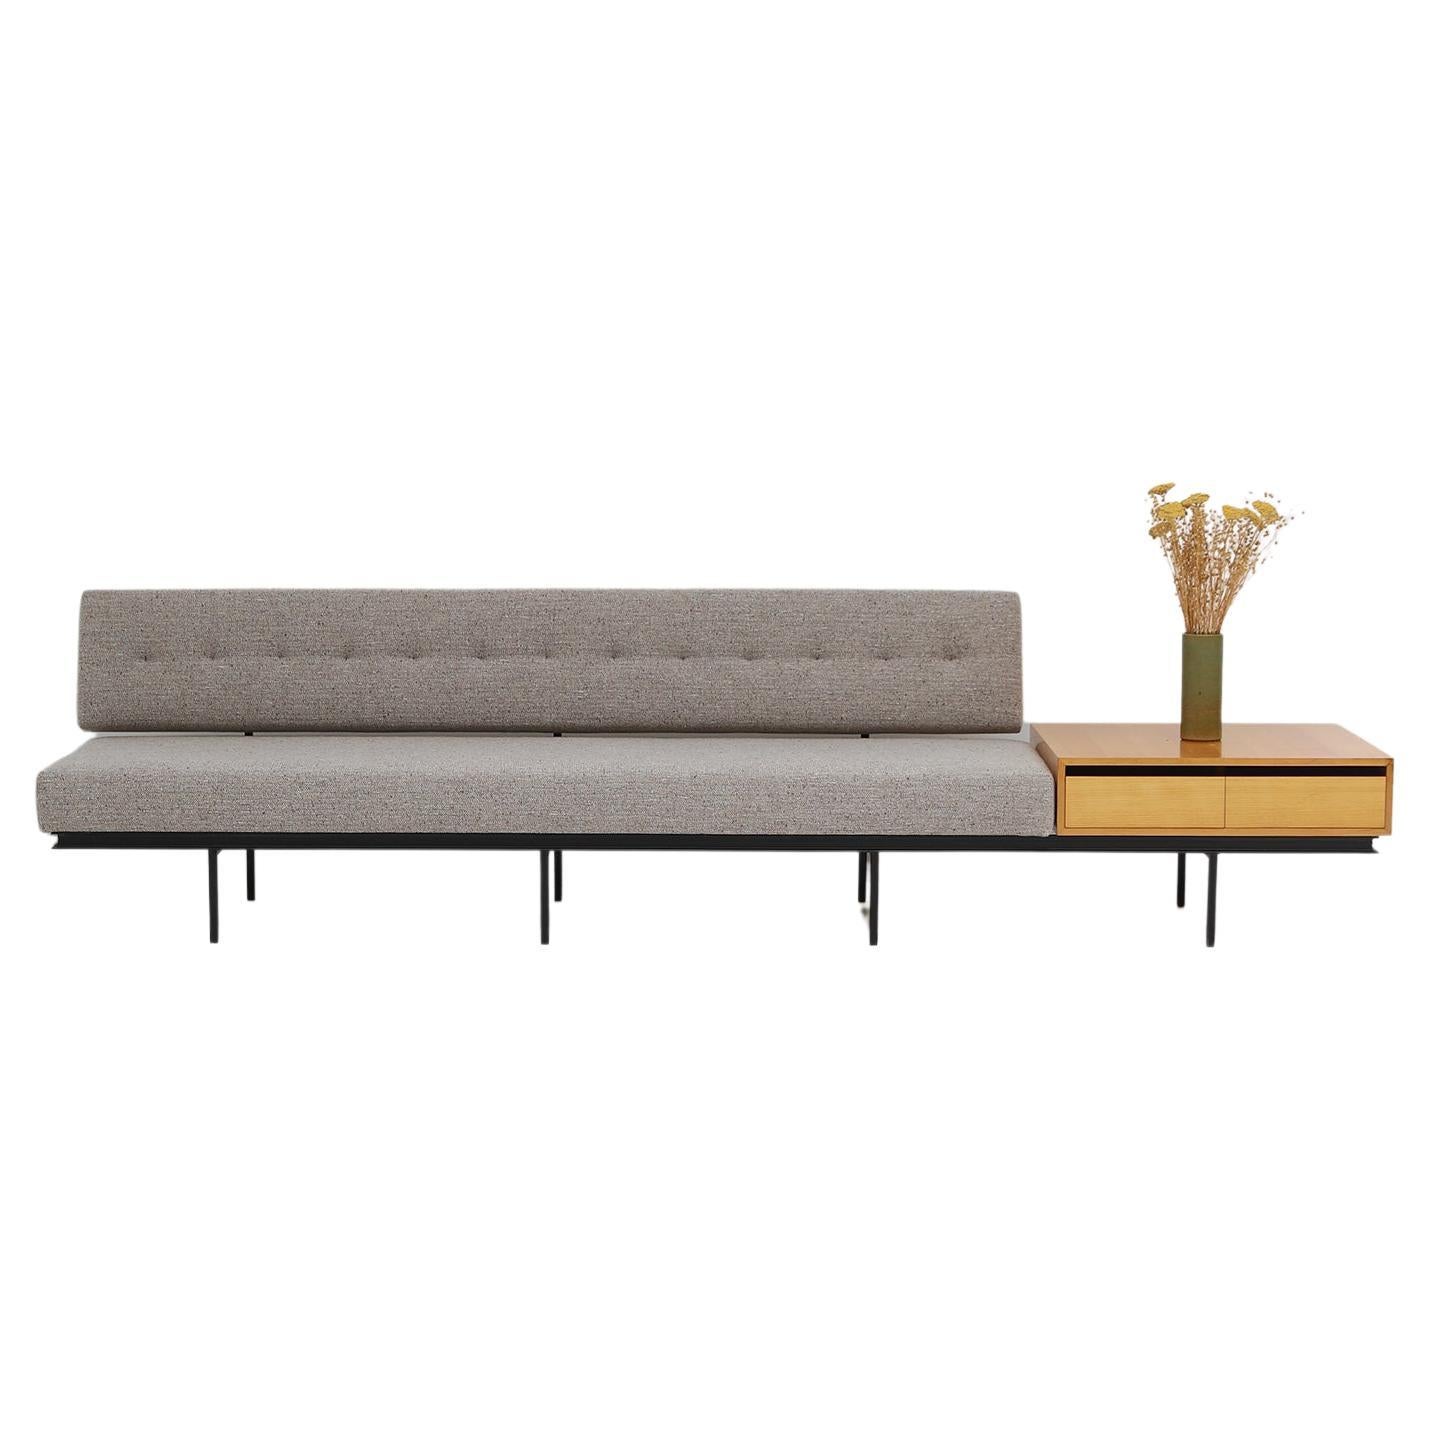 Mid-Century Modern Sofa & End Cabinet in a Grey Fabric by Florence Knoll, 1960s